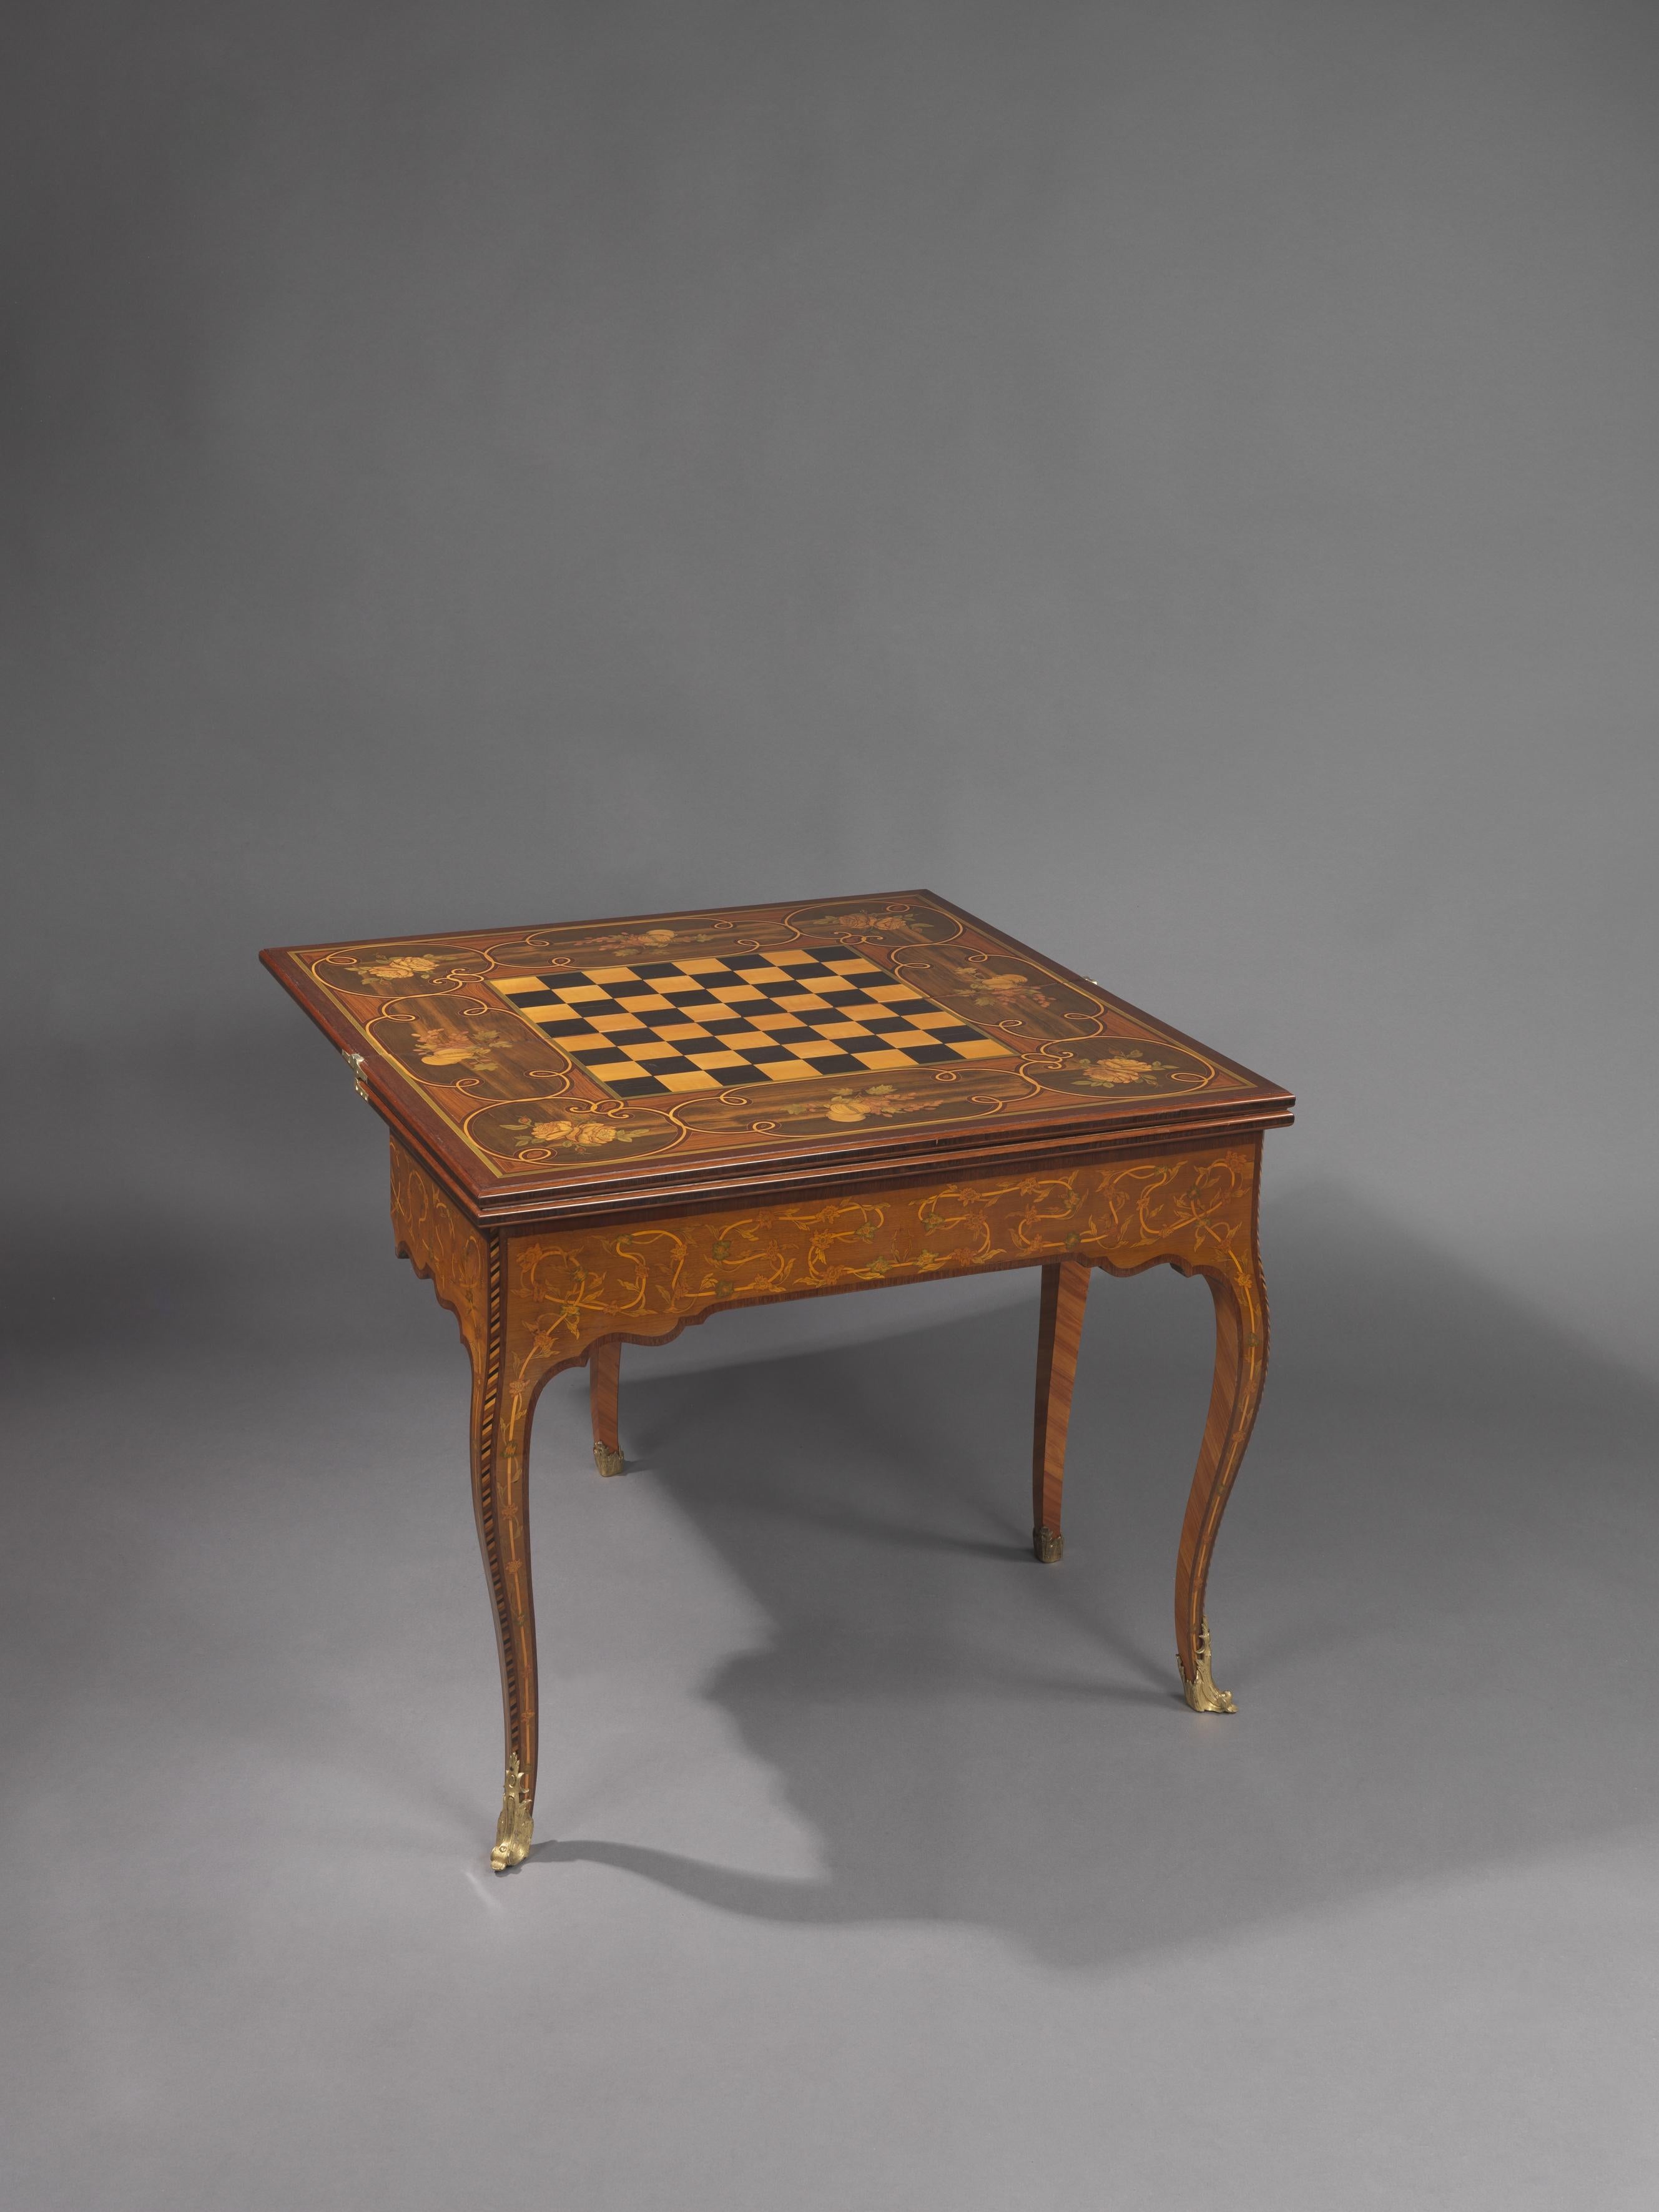 19th Century Important Russian Imperial Period Triple Turn-Over Games Table, circa 1820 For Sale